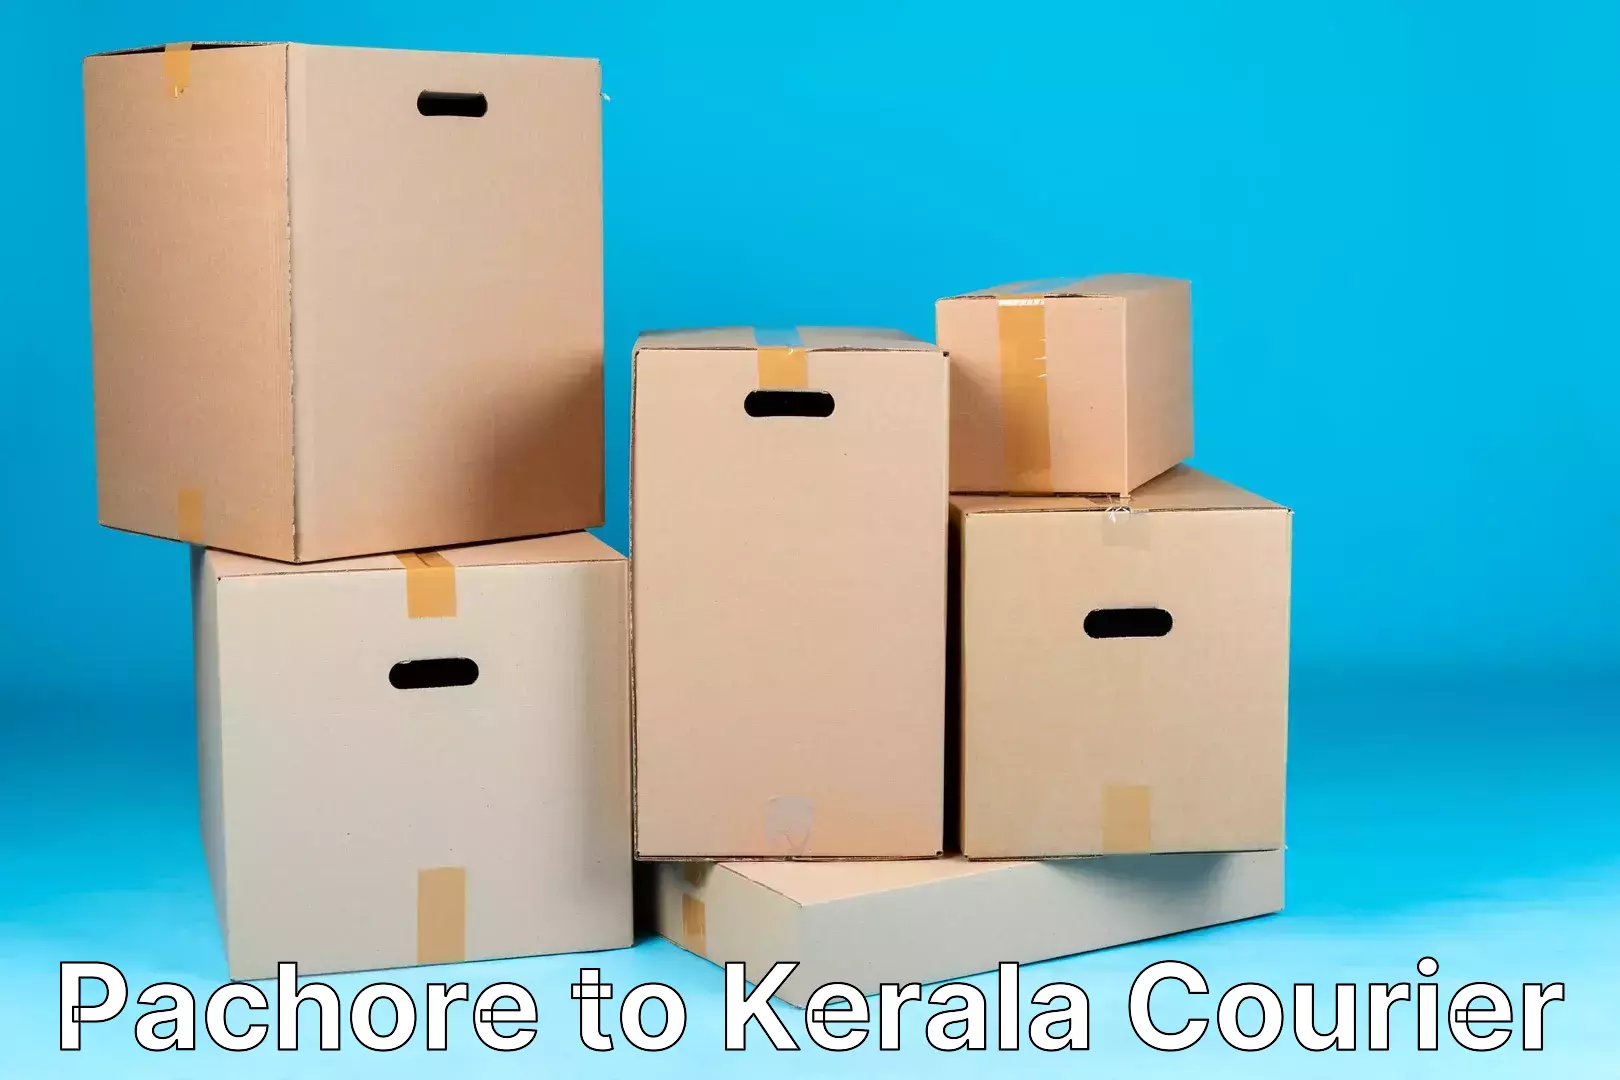 Nationwide courier service Pachore to Kerala